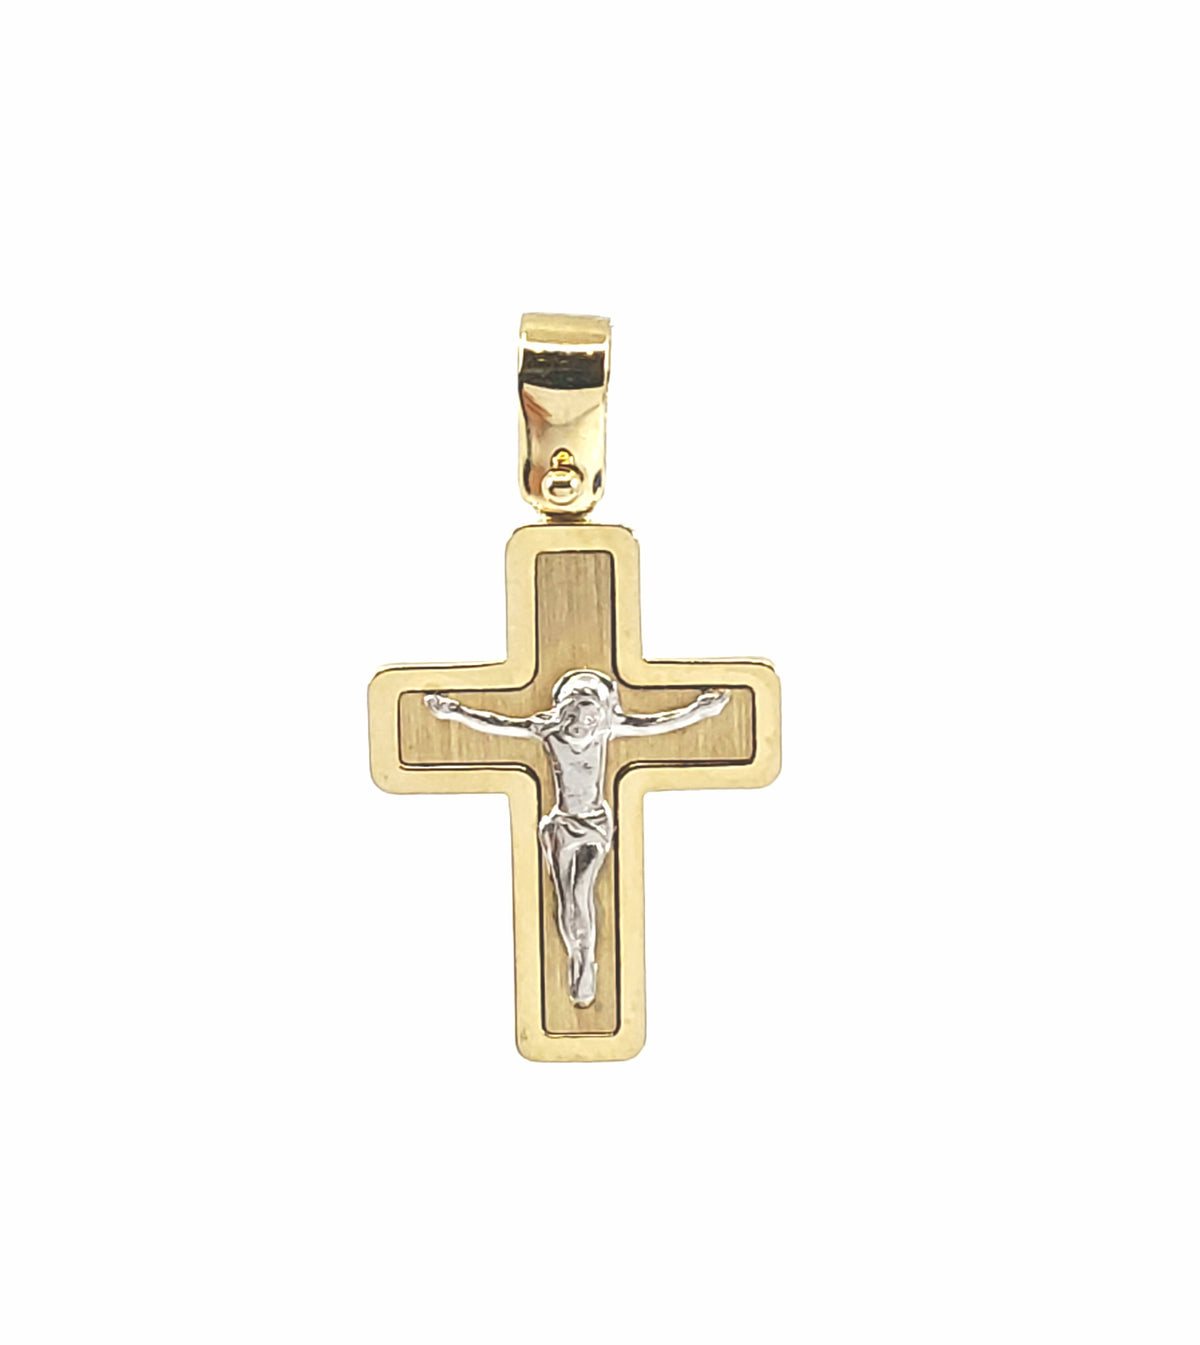 10K Two Toned Yellow and White Gold Cross Charm with Crucifix Center - 17mm x 13mm